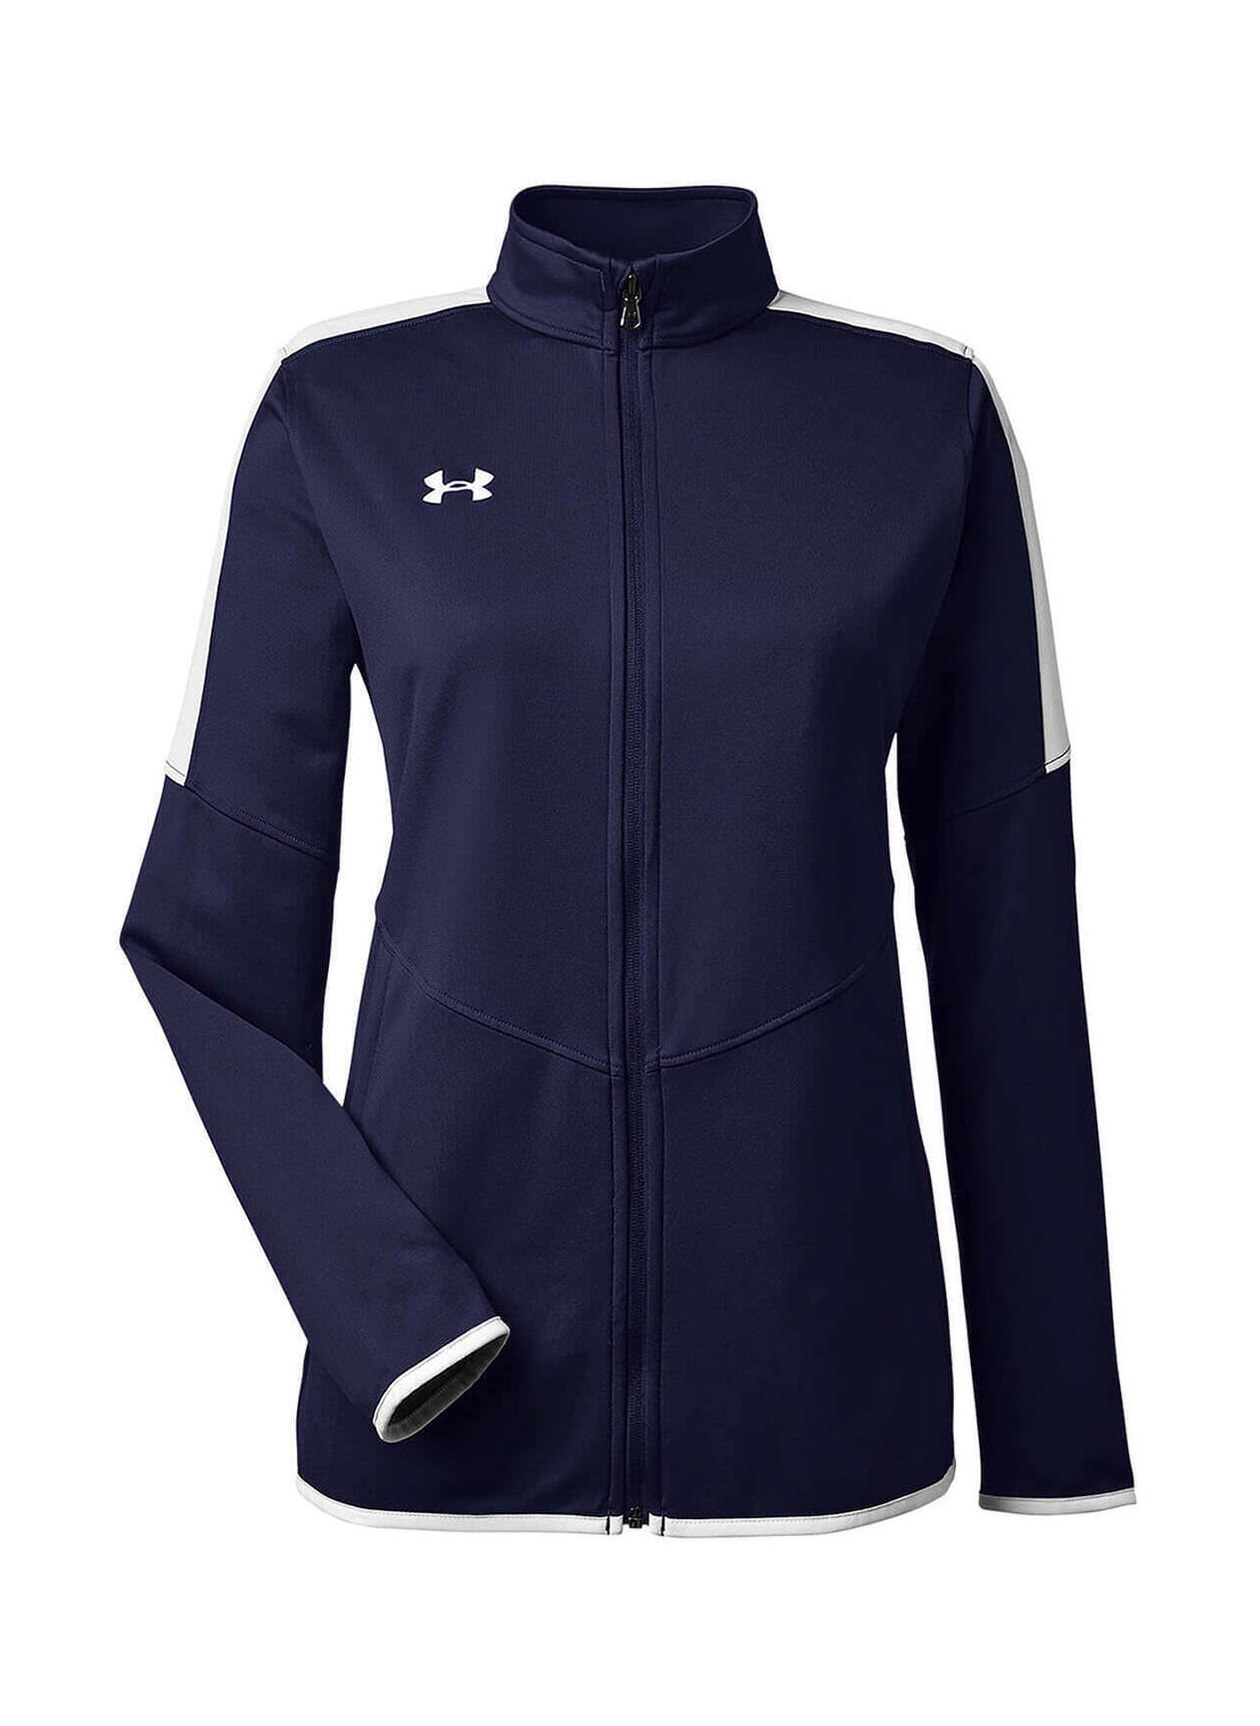 Under Armour Women's Navy Rival Knit Jacket